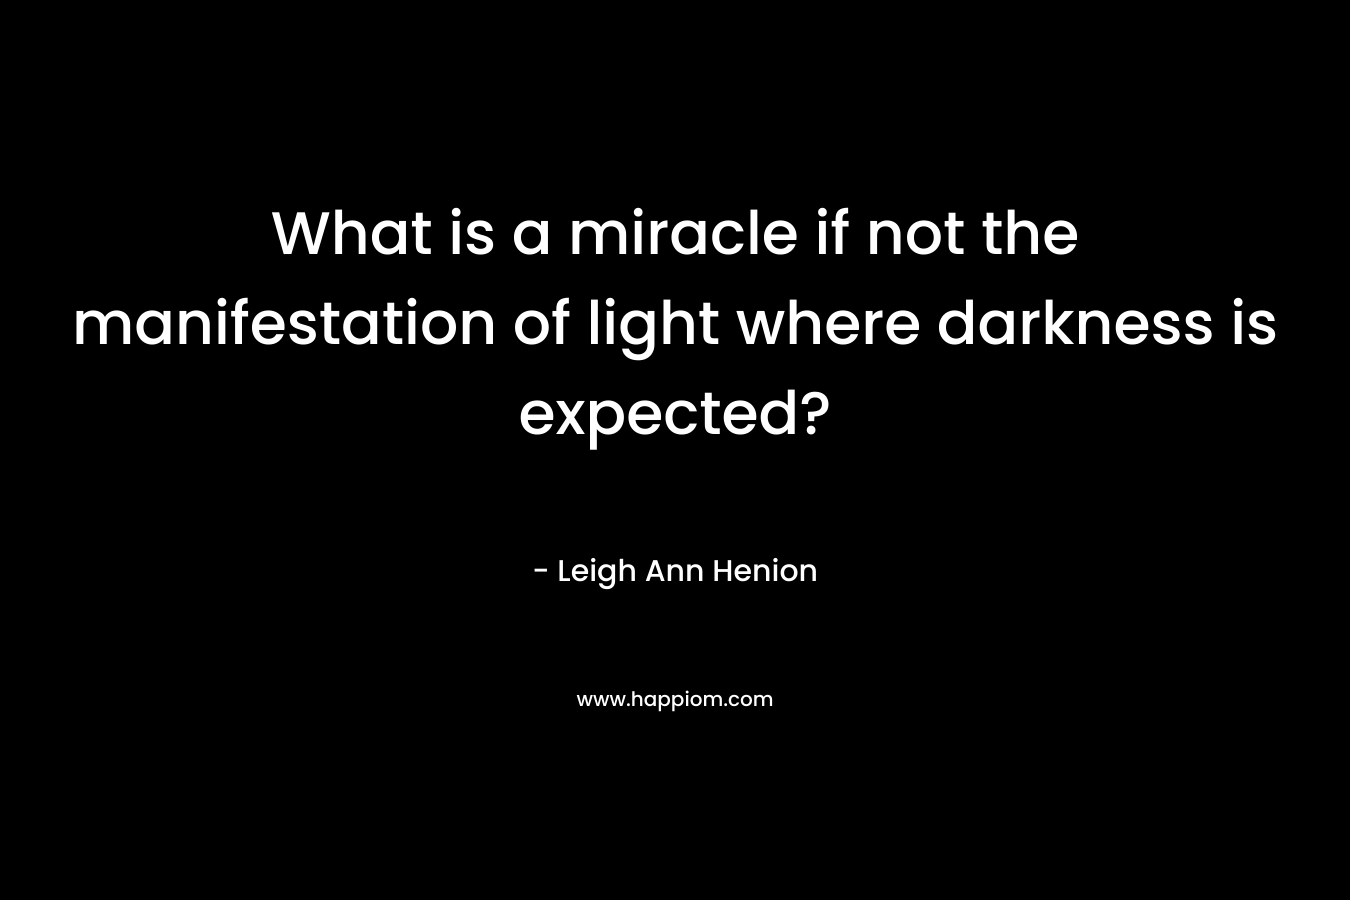 What is a miracle if not the manifestation of light where darkness is expected?